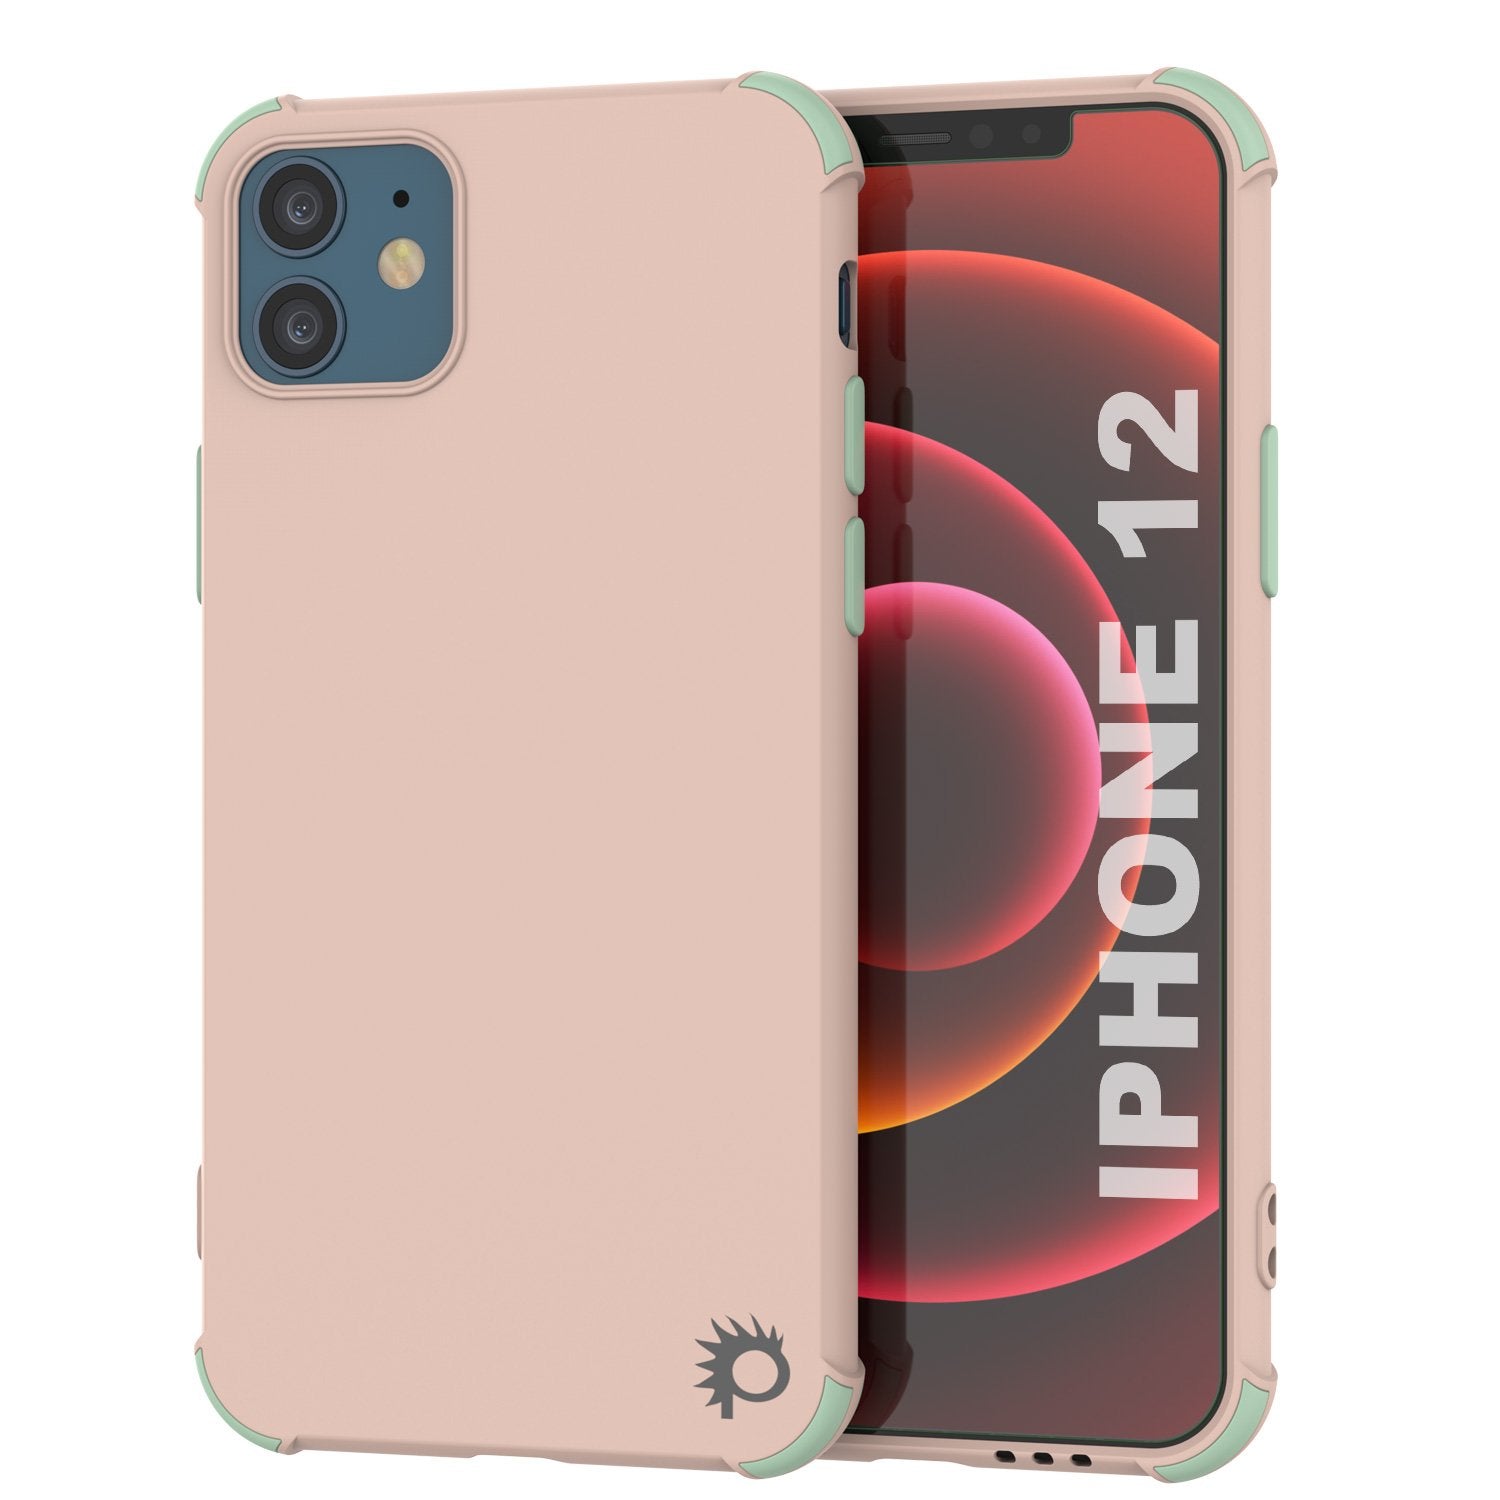 Punkcase Protective & Lightweight TPU Case [Sunshine Series] for iPhone 12 [Pink] (Color in image: Pink)